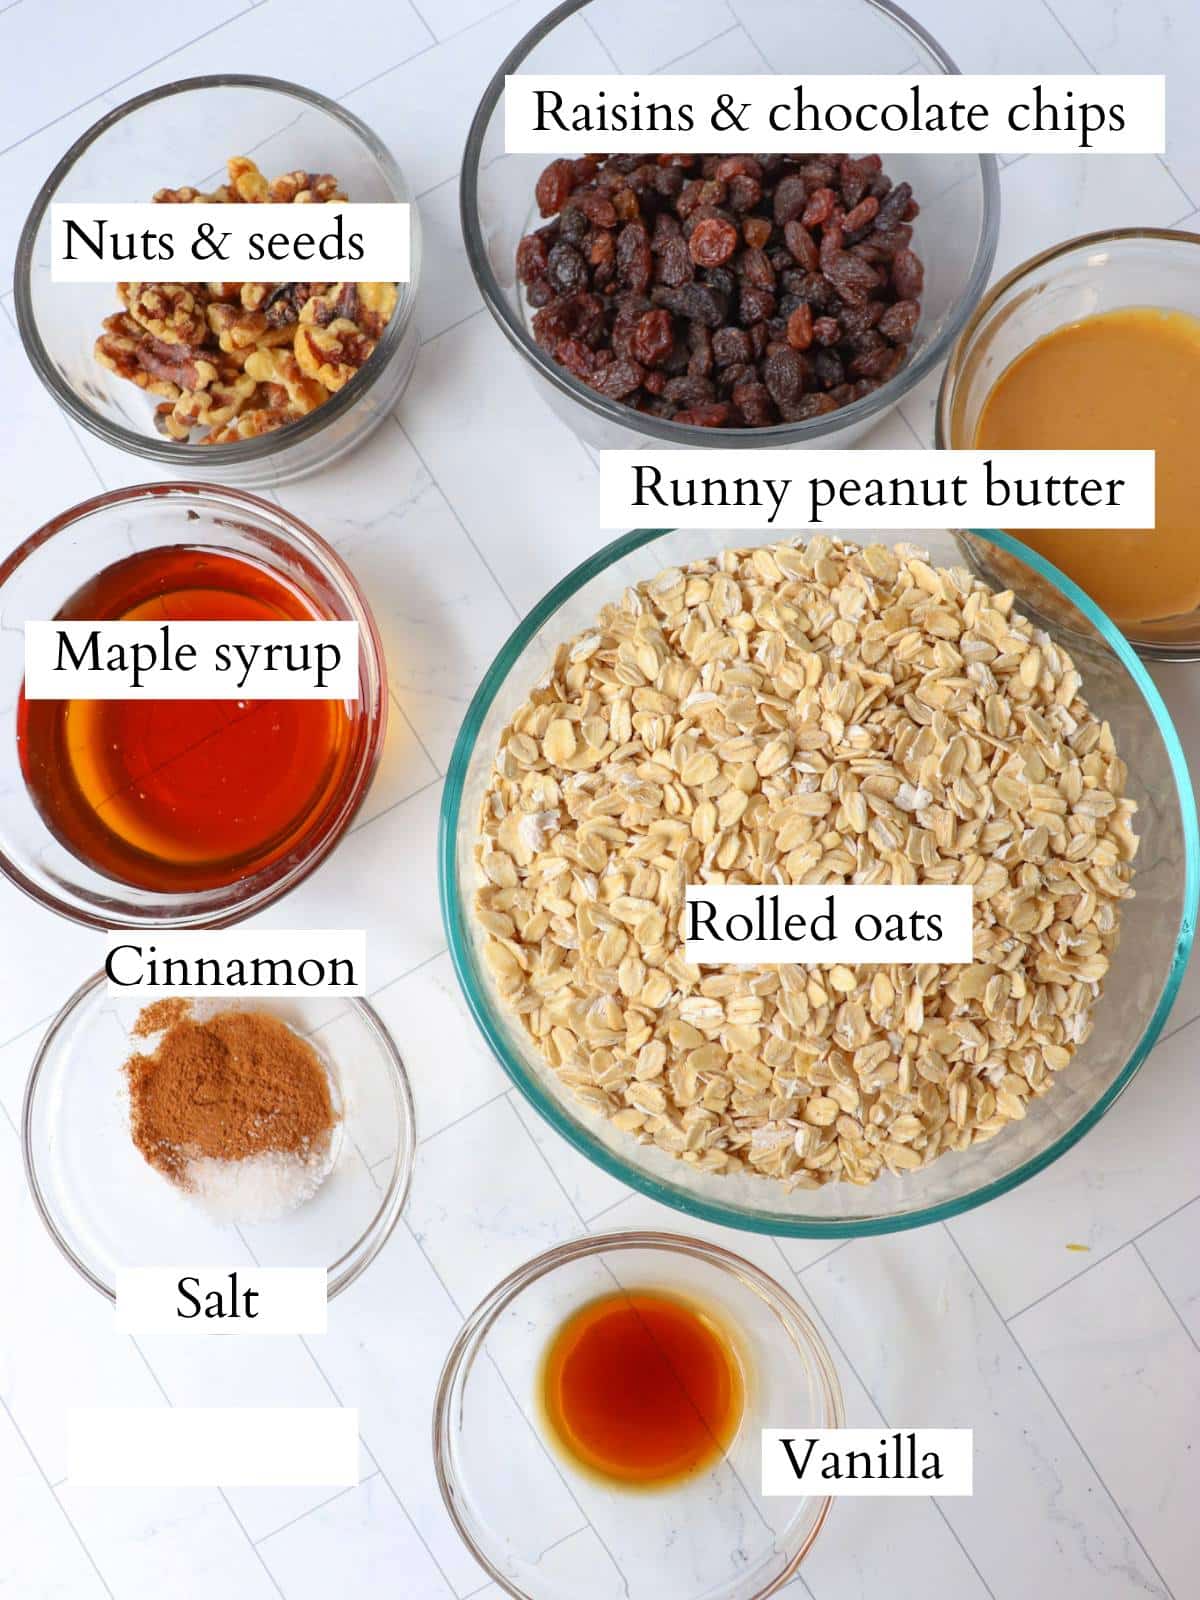 Ingredients for homemade vegan granola laid out on a counter.